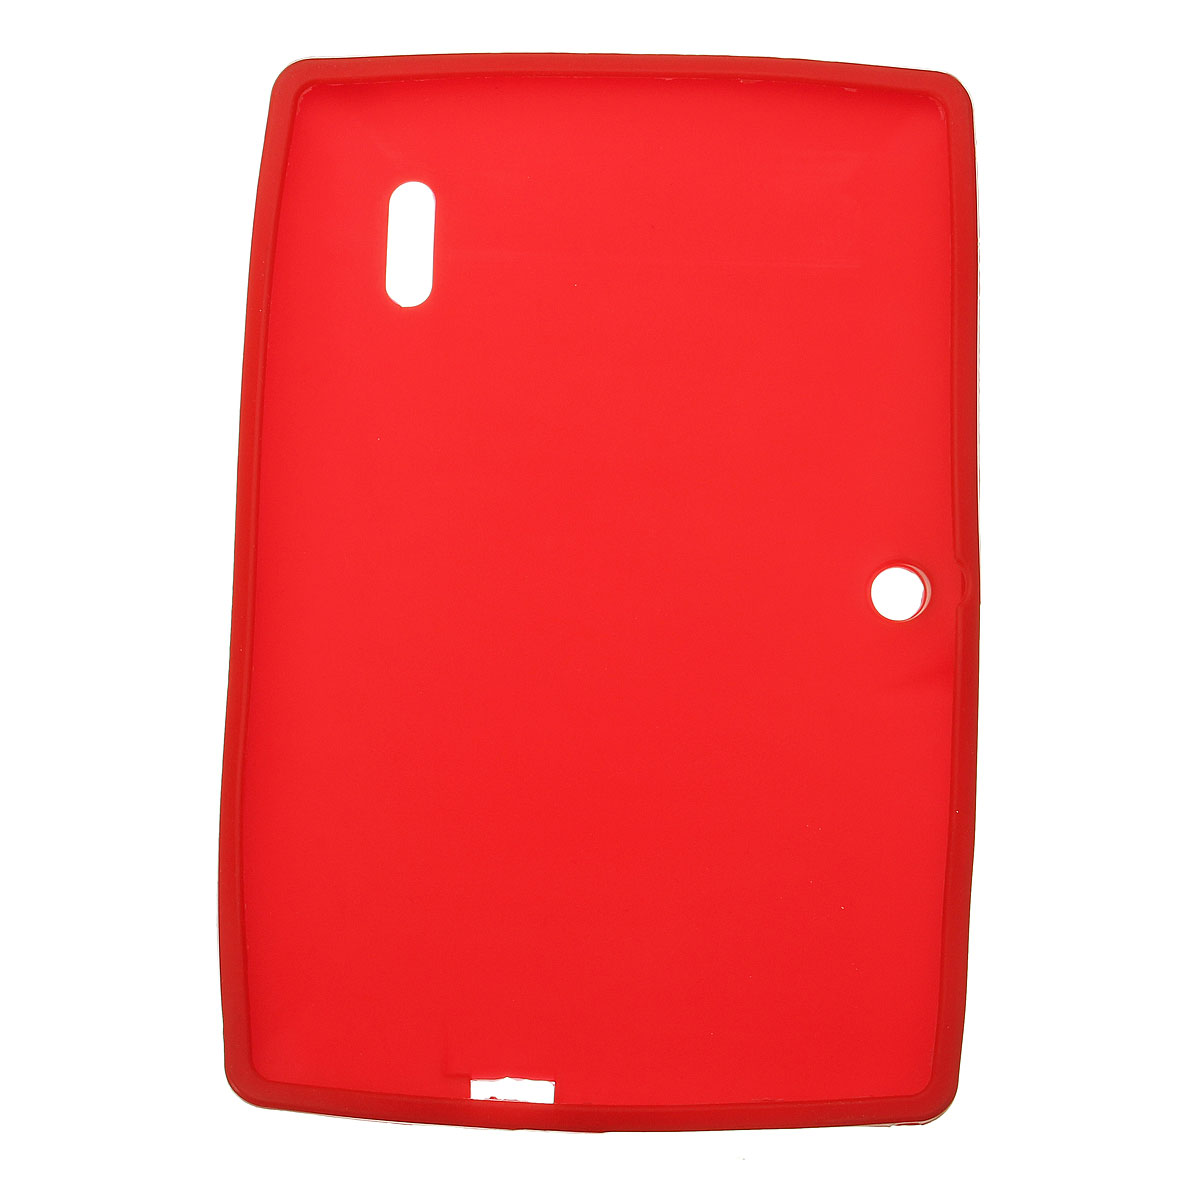 Multi-color-Soft-Silicone-Protective-Back-Cover-Case-For-7-Inch-Tablet-PC-1974994-1